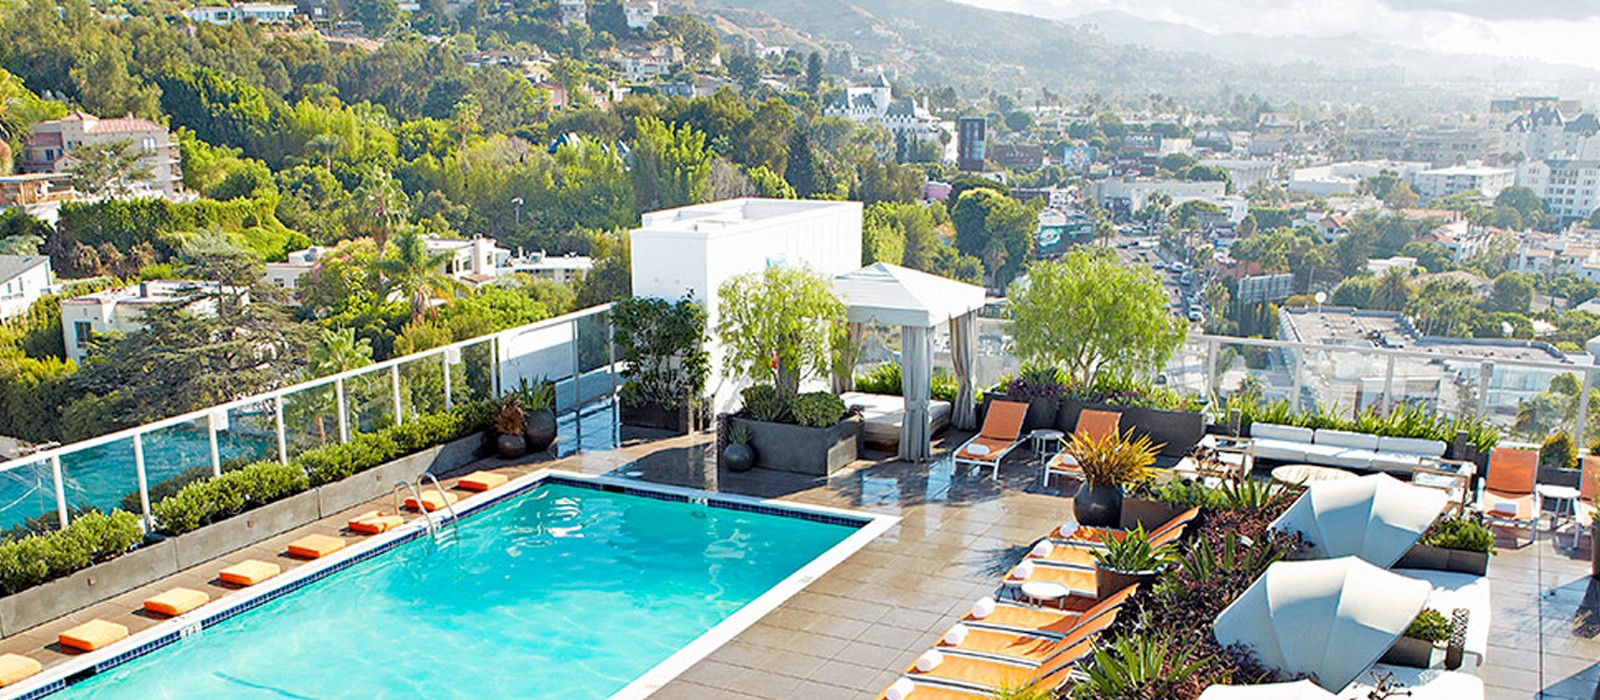 Los Angeles holiday - Andaz West hollywood - Header